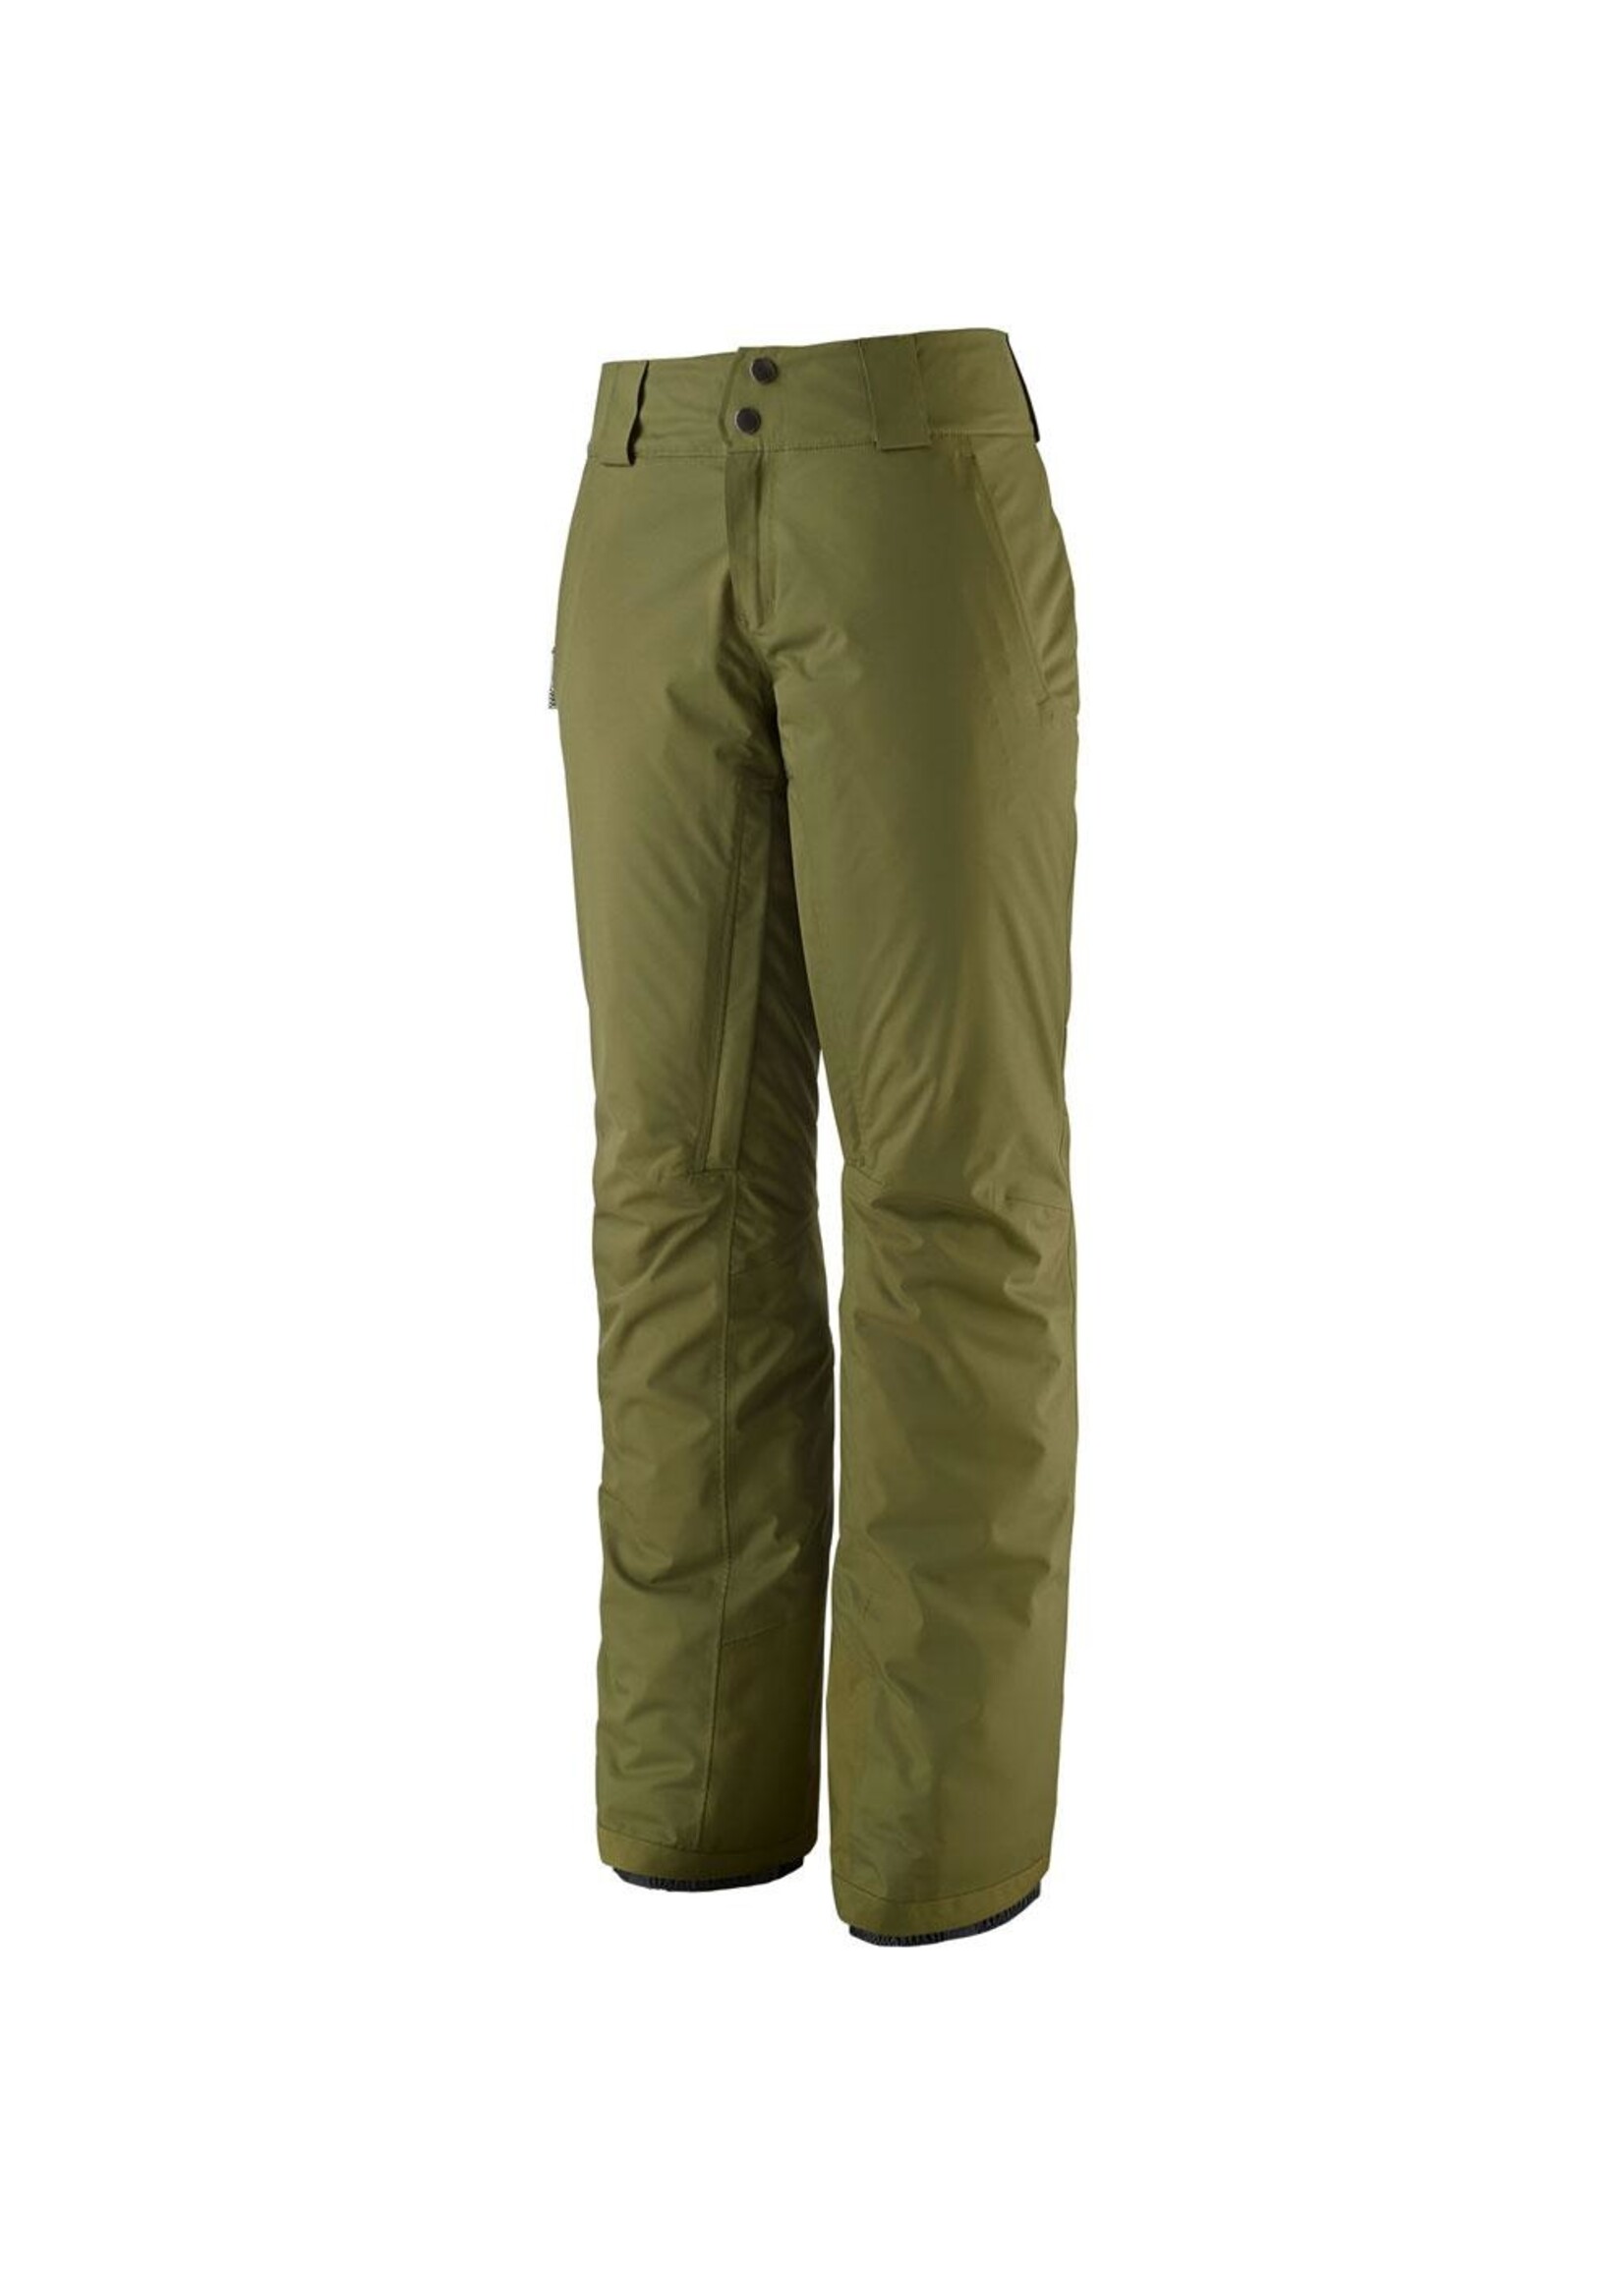 Patagonia W Insulated Snowbelle Pants - Reg Palo Green